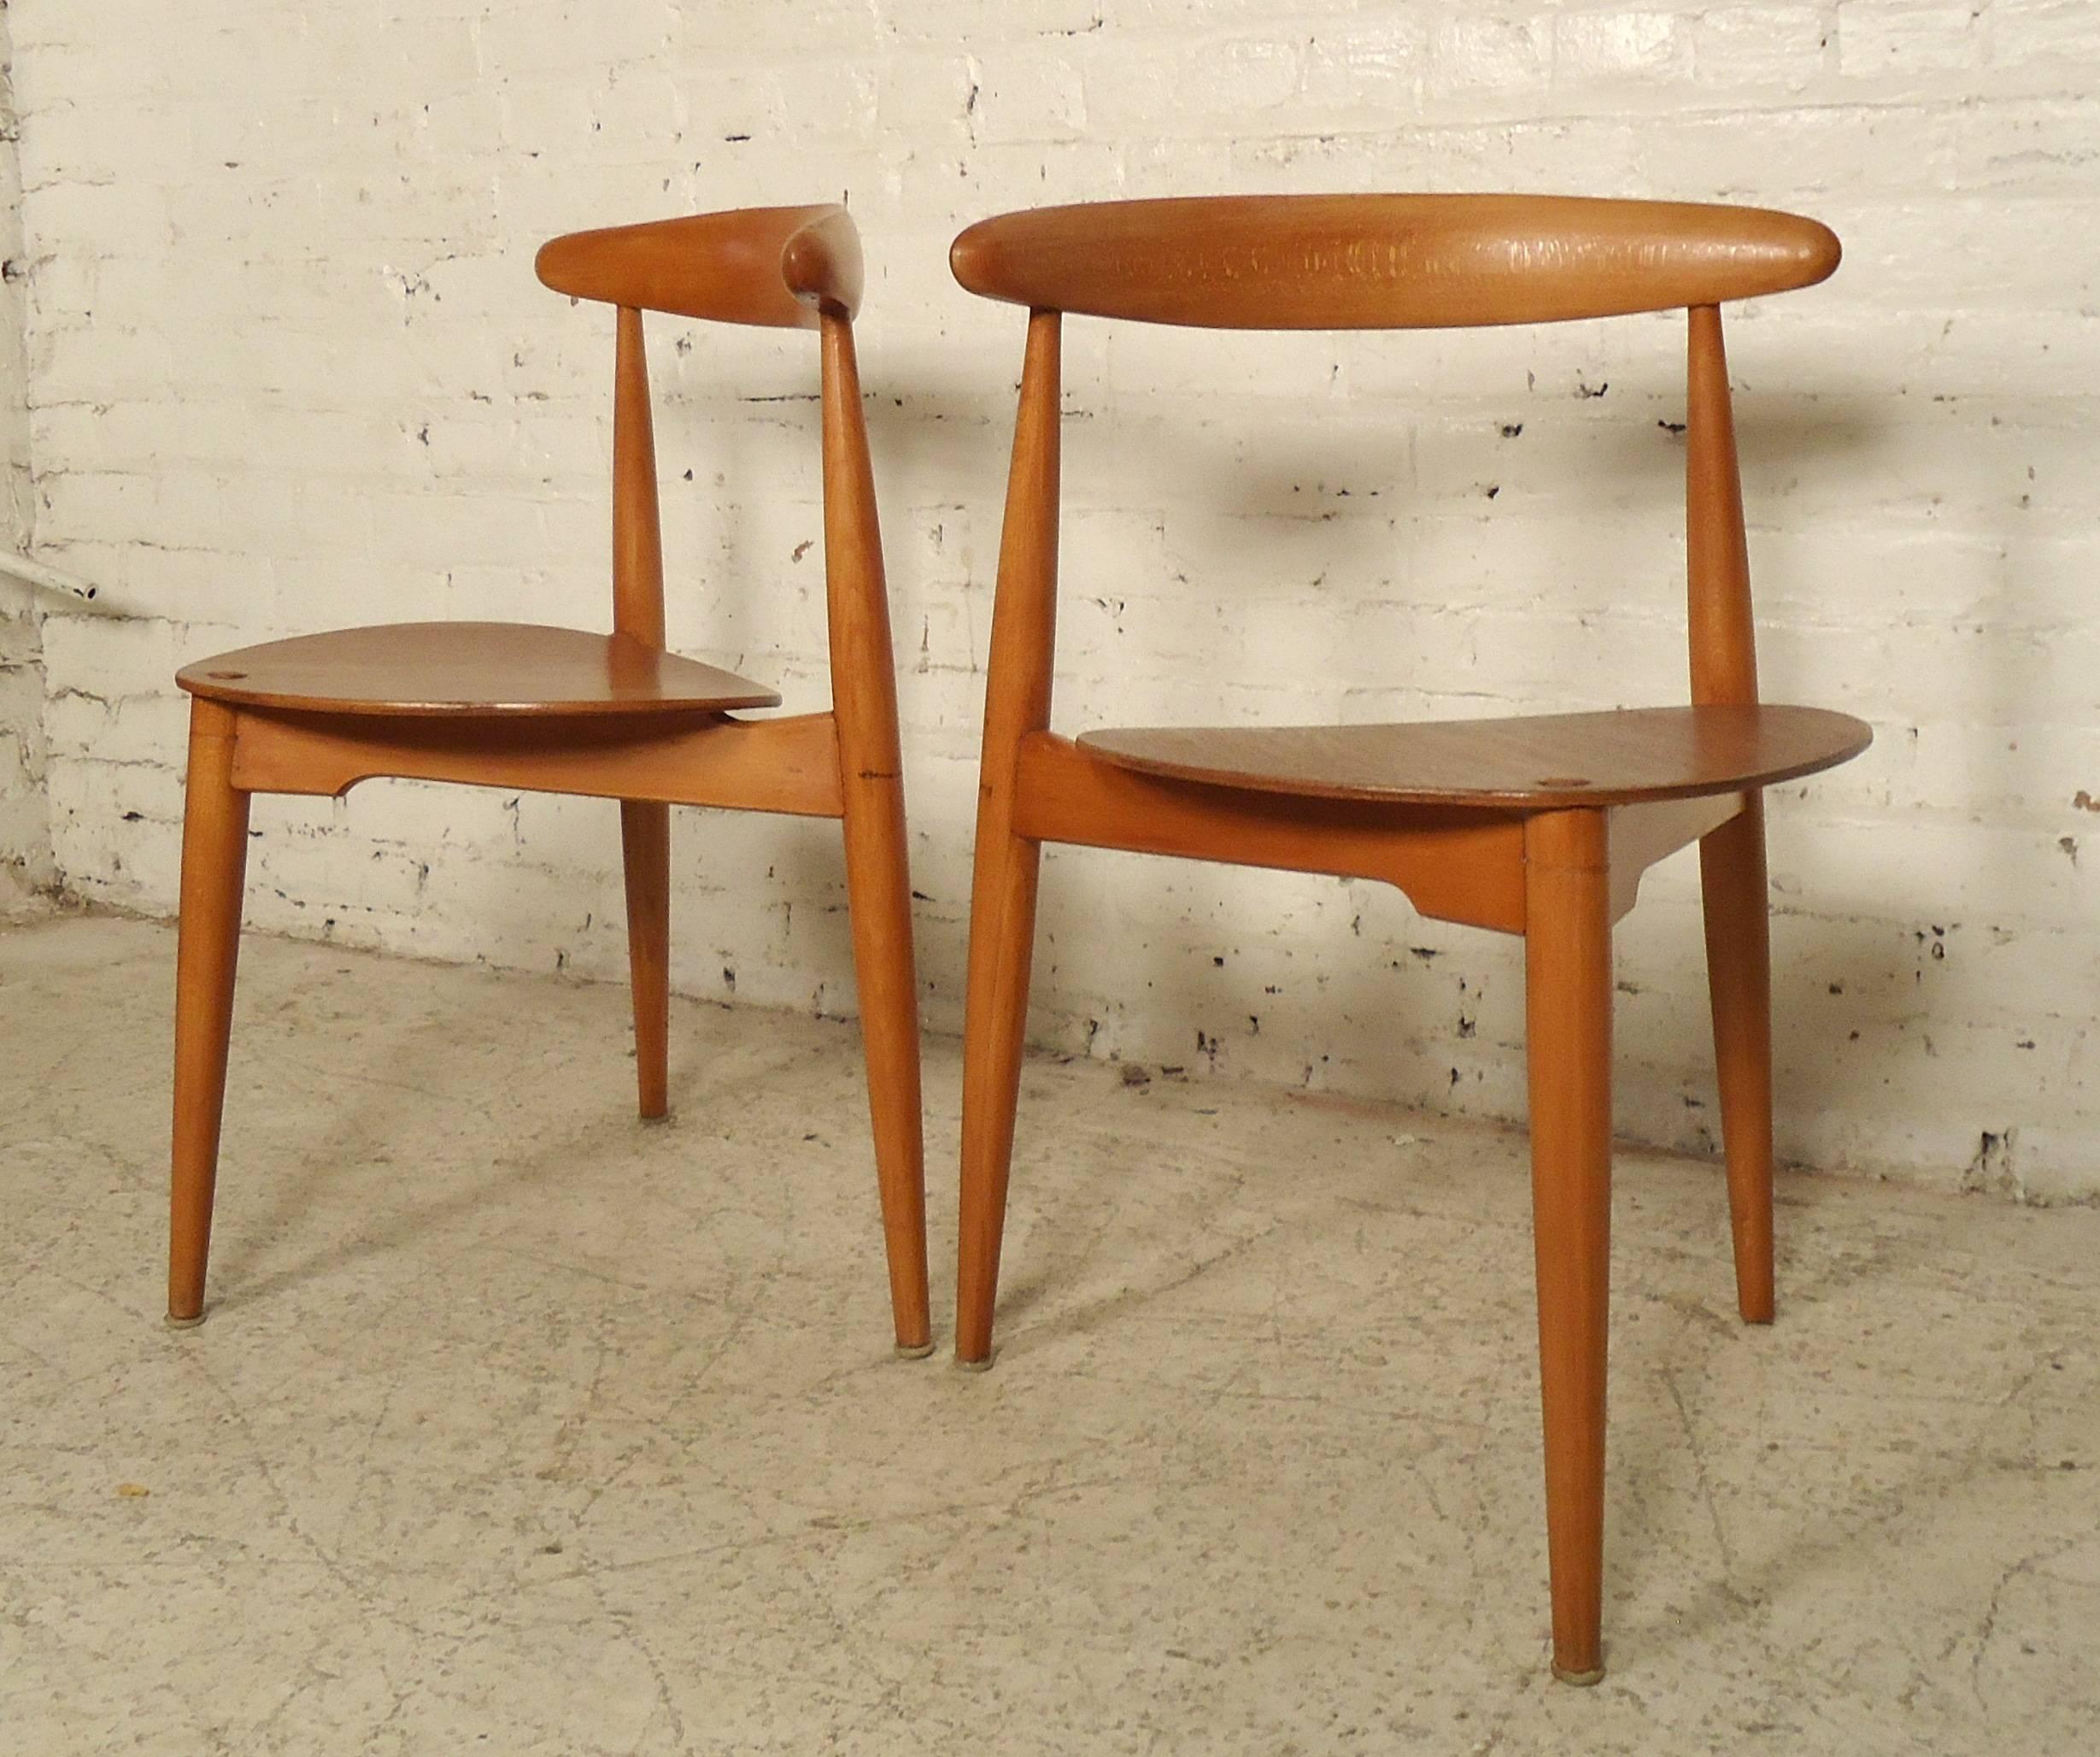 Beautiful set of three leg chairs features a solid frame, handcrafted back and seat on sturdy legs. Hans Wegner / Fritz Hansen styled chairs.

Please confirm item location (NY or NJ).